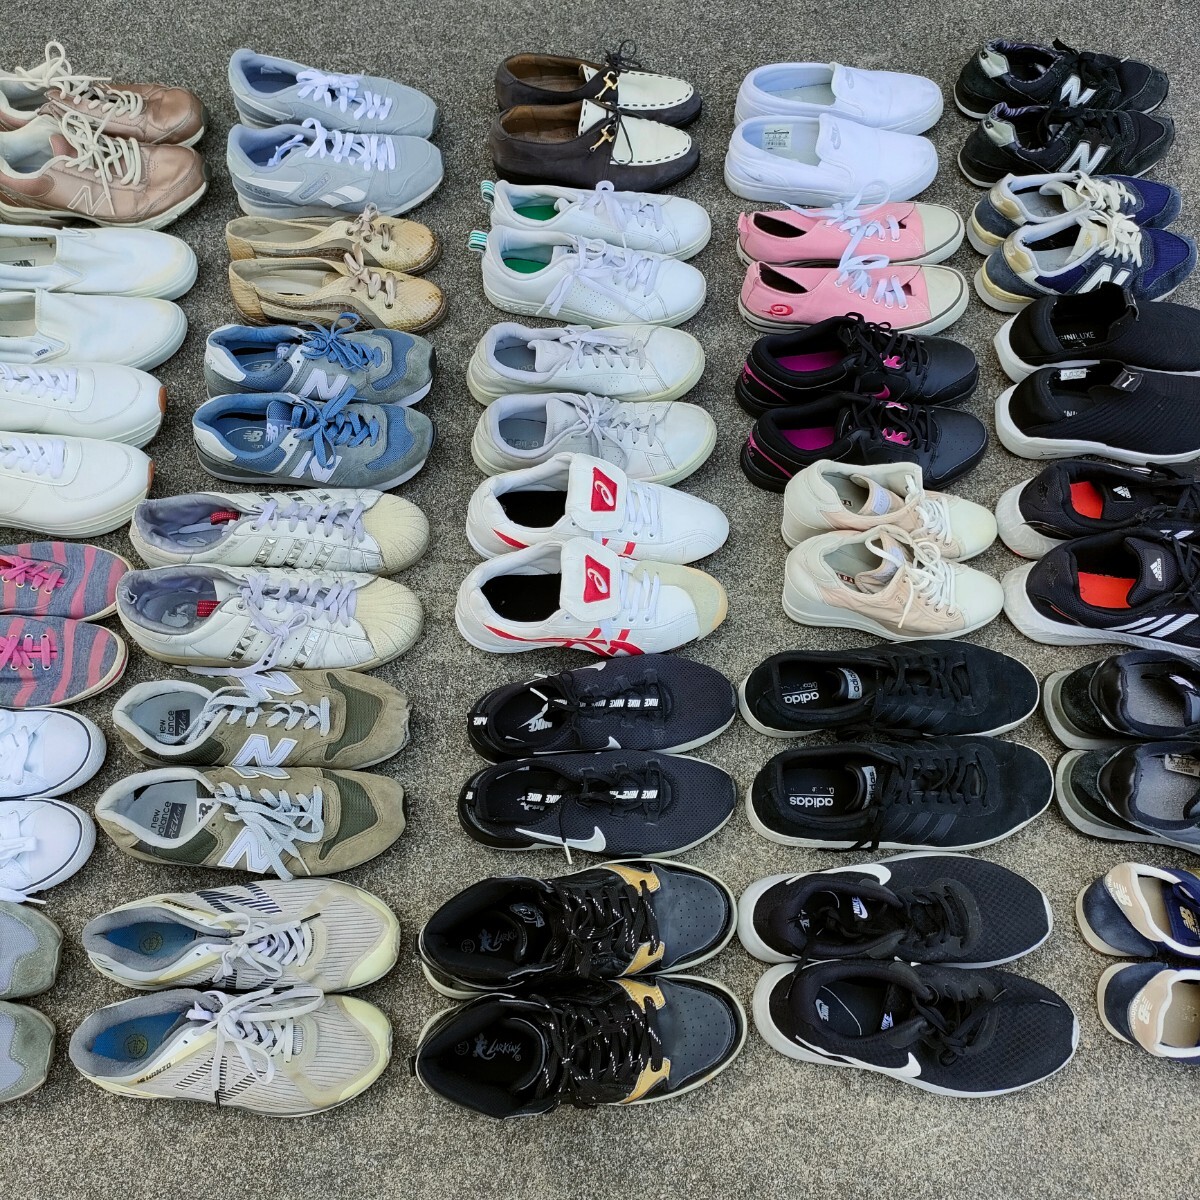 1 jpy Prada Nike New balance Polo Vans etc. sneakers 30 point set sale lady's men's mixing recommended 